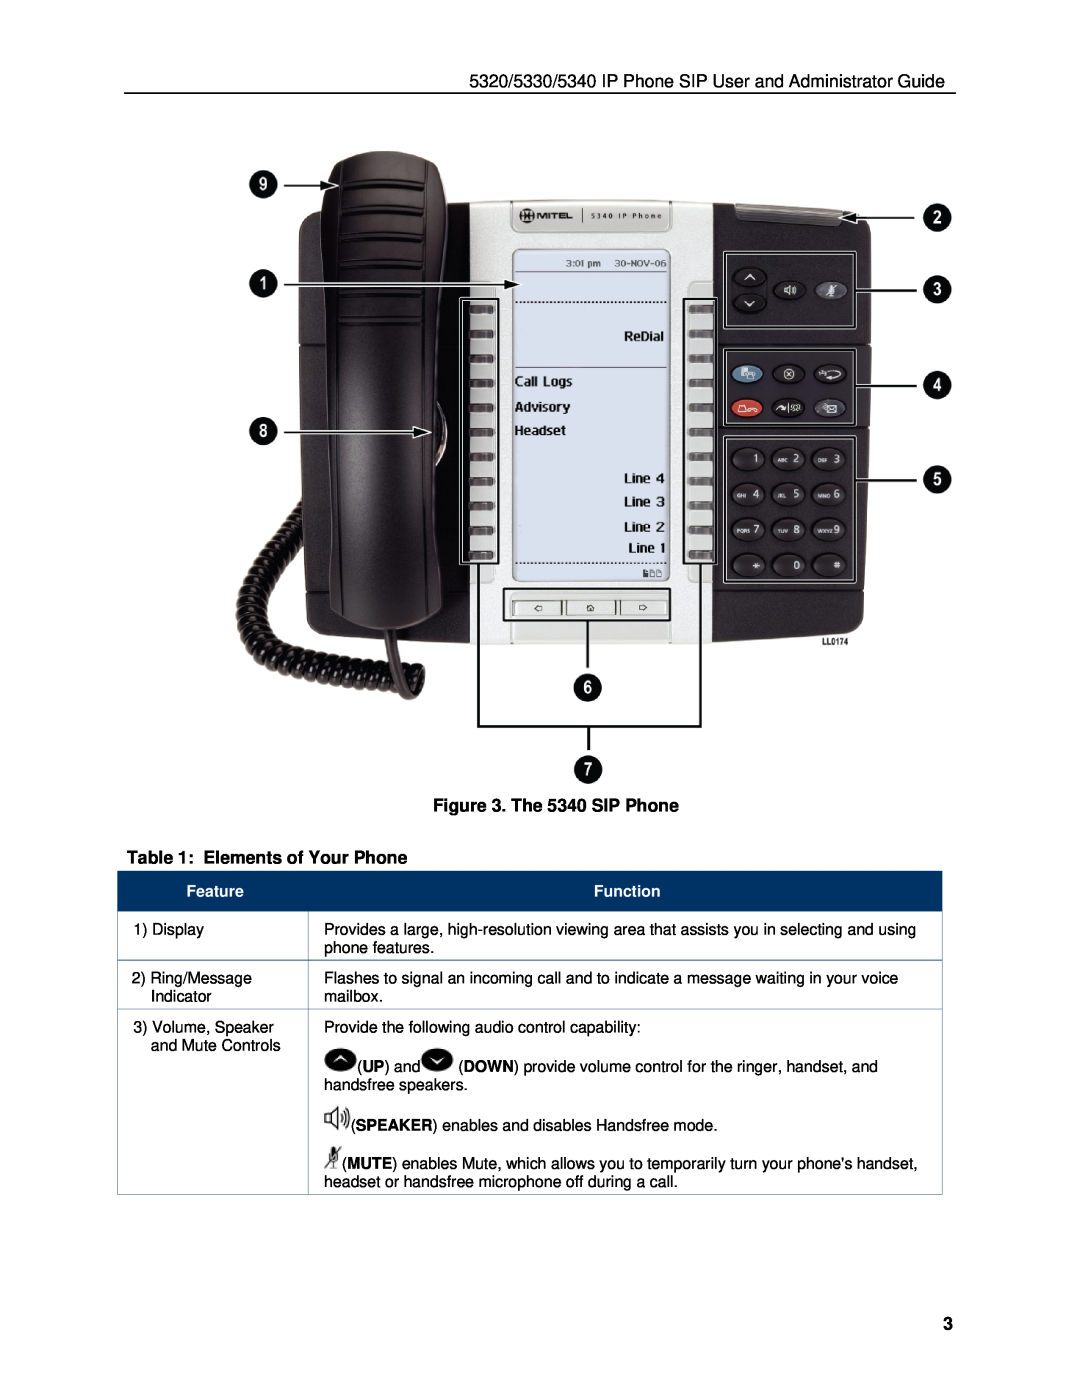 Mitel 5330 manual The 5340 SIP Phone, Elements of Your Phone, Feature, Function 